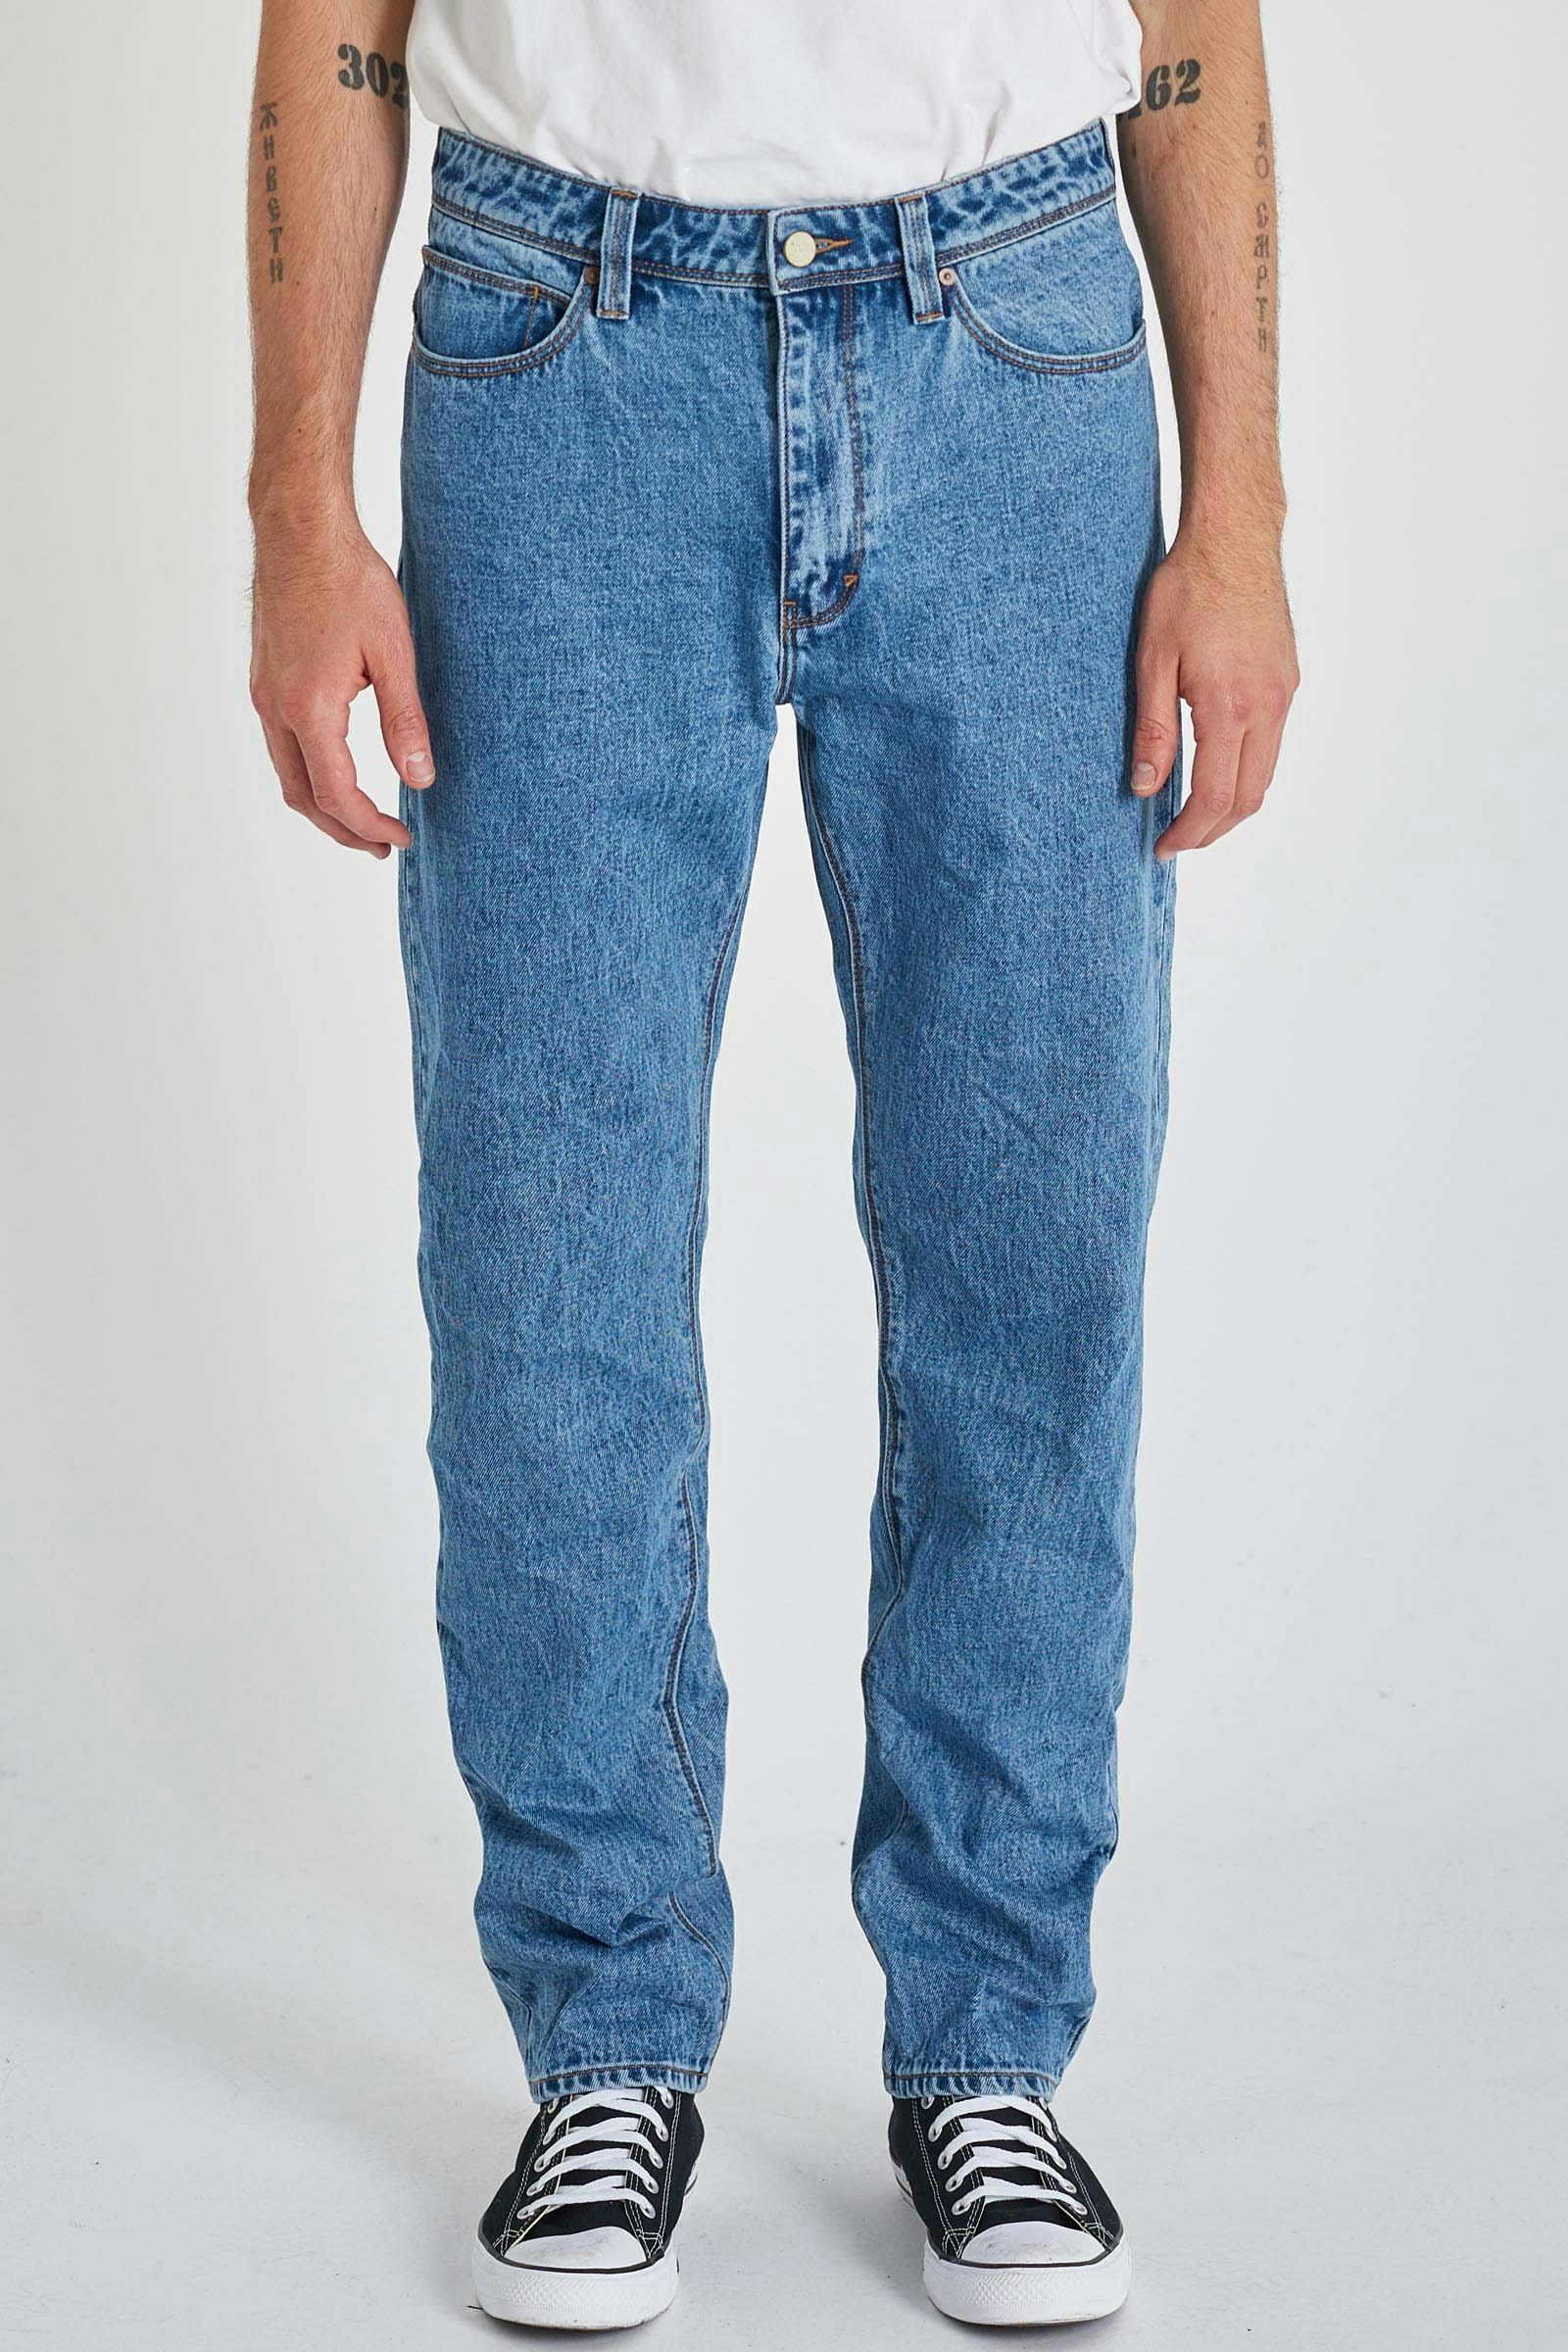 Levi's high waisted tapered jeans in mid-stone wash